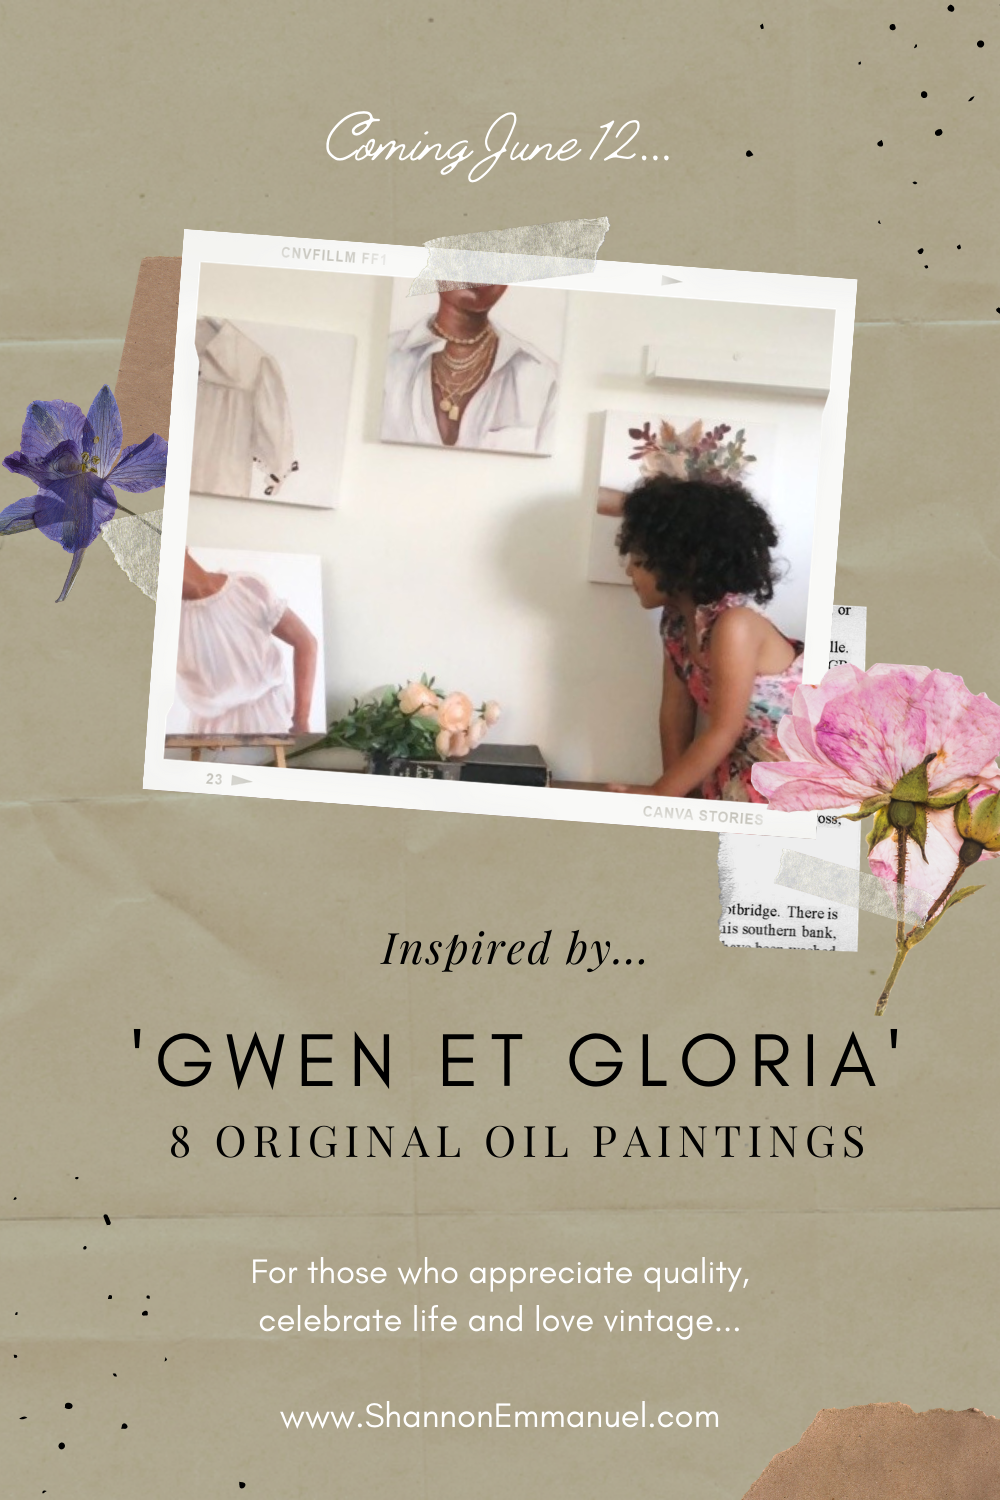 Release Date for the Inspired by Gwen et Gloria Collection of Original Oil Paintings